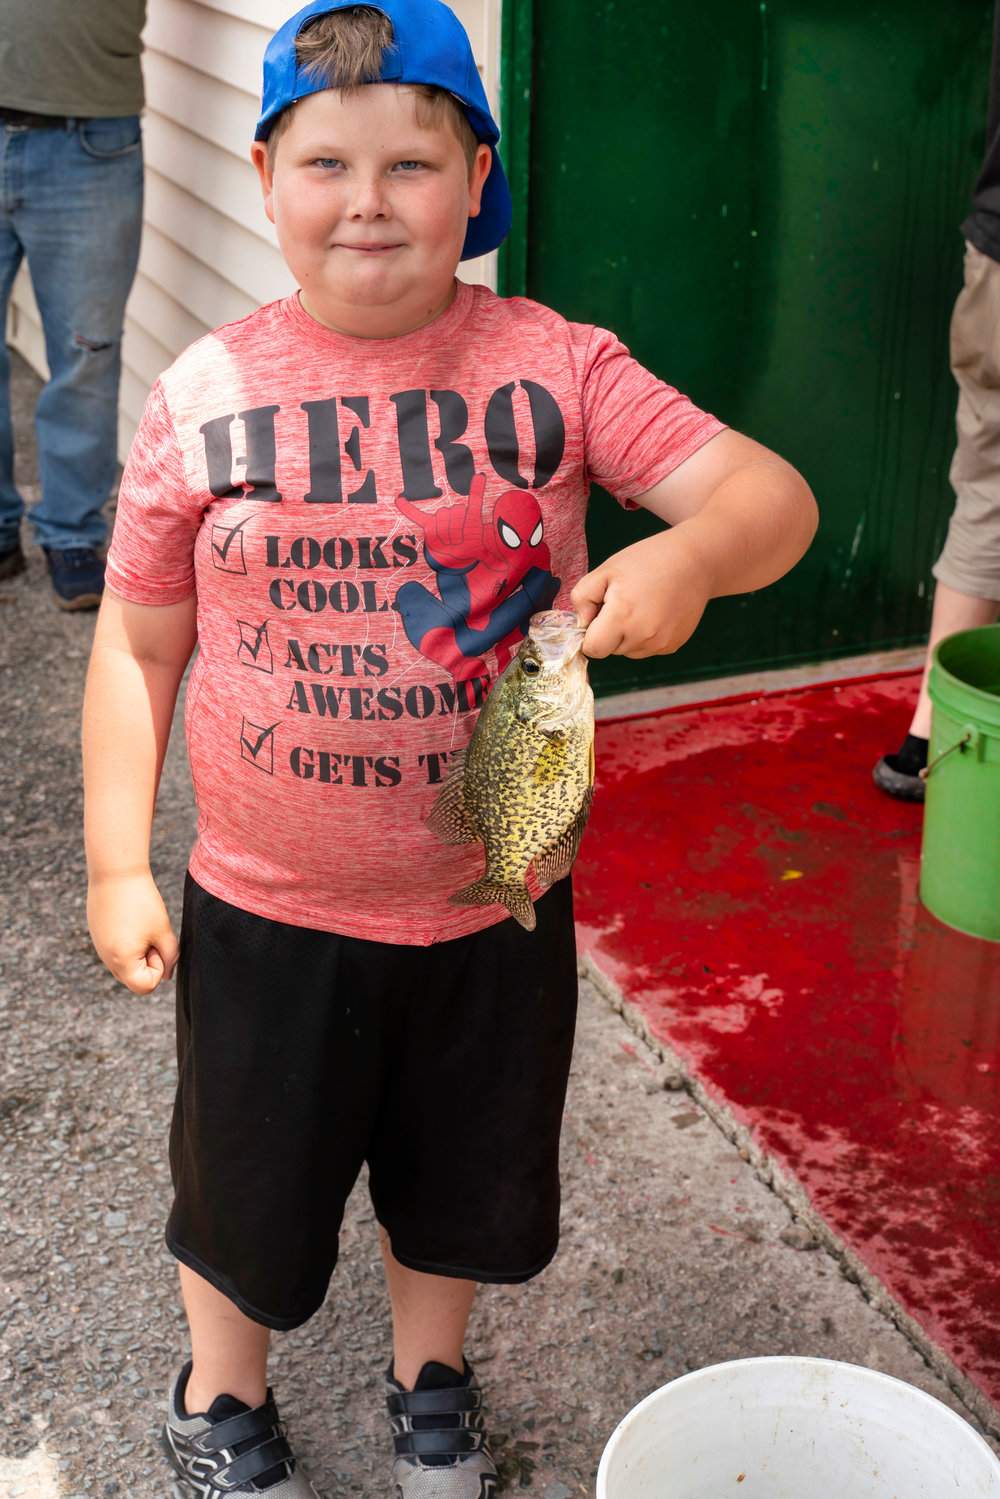 Andrew Failla from Liberty was the smallest fisherman. Here he is with his catch.